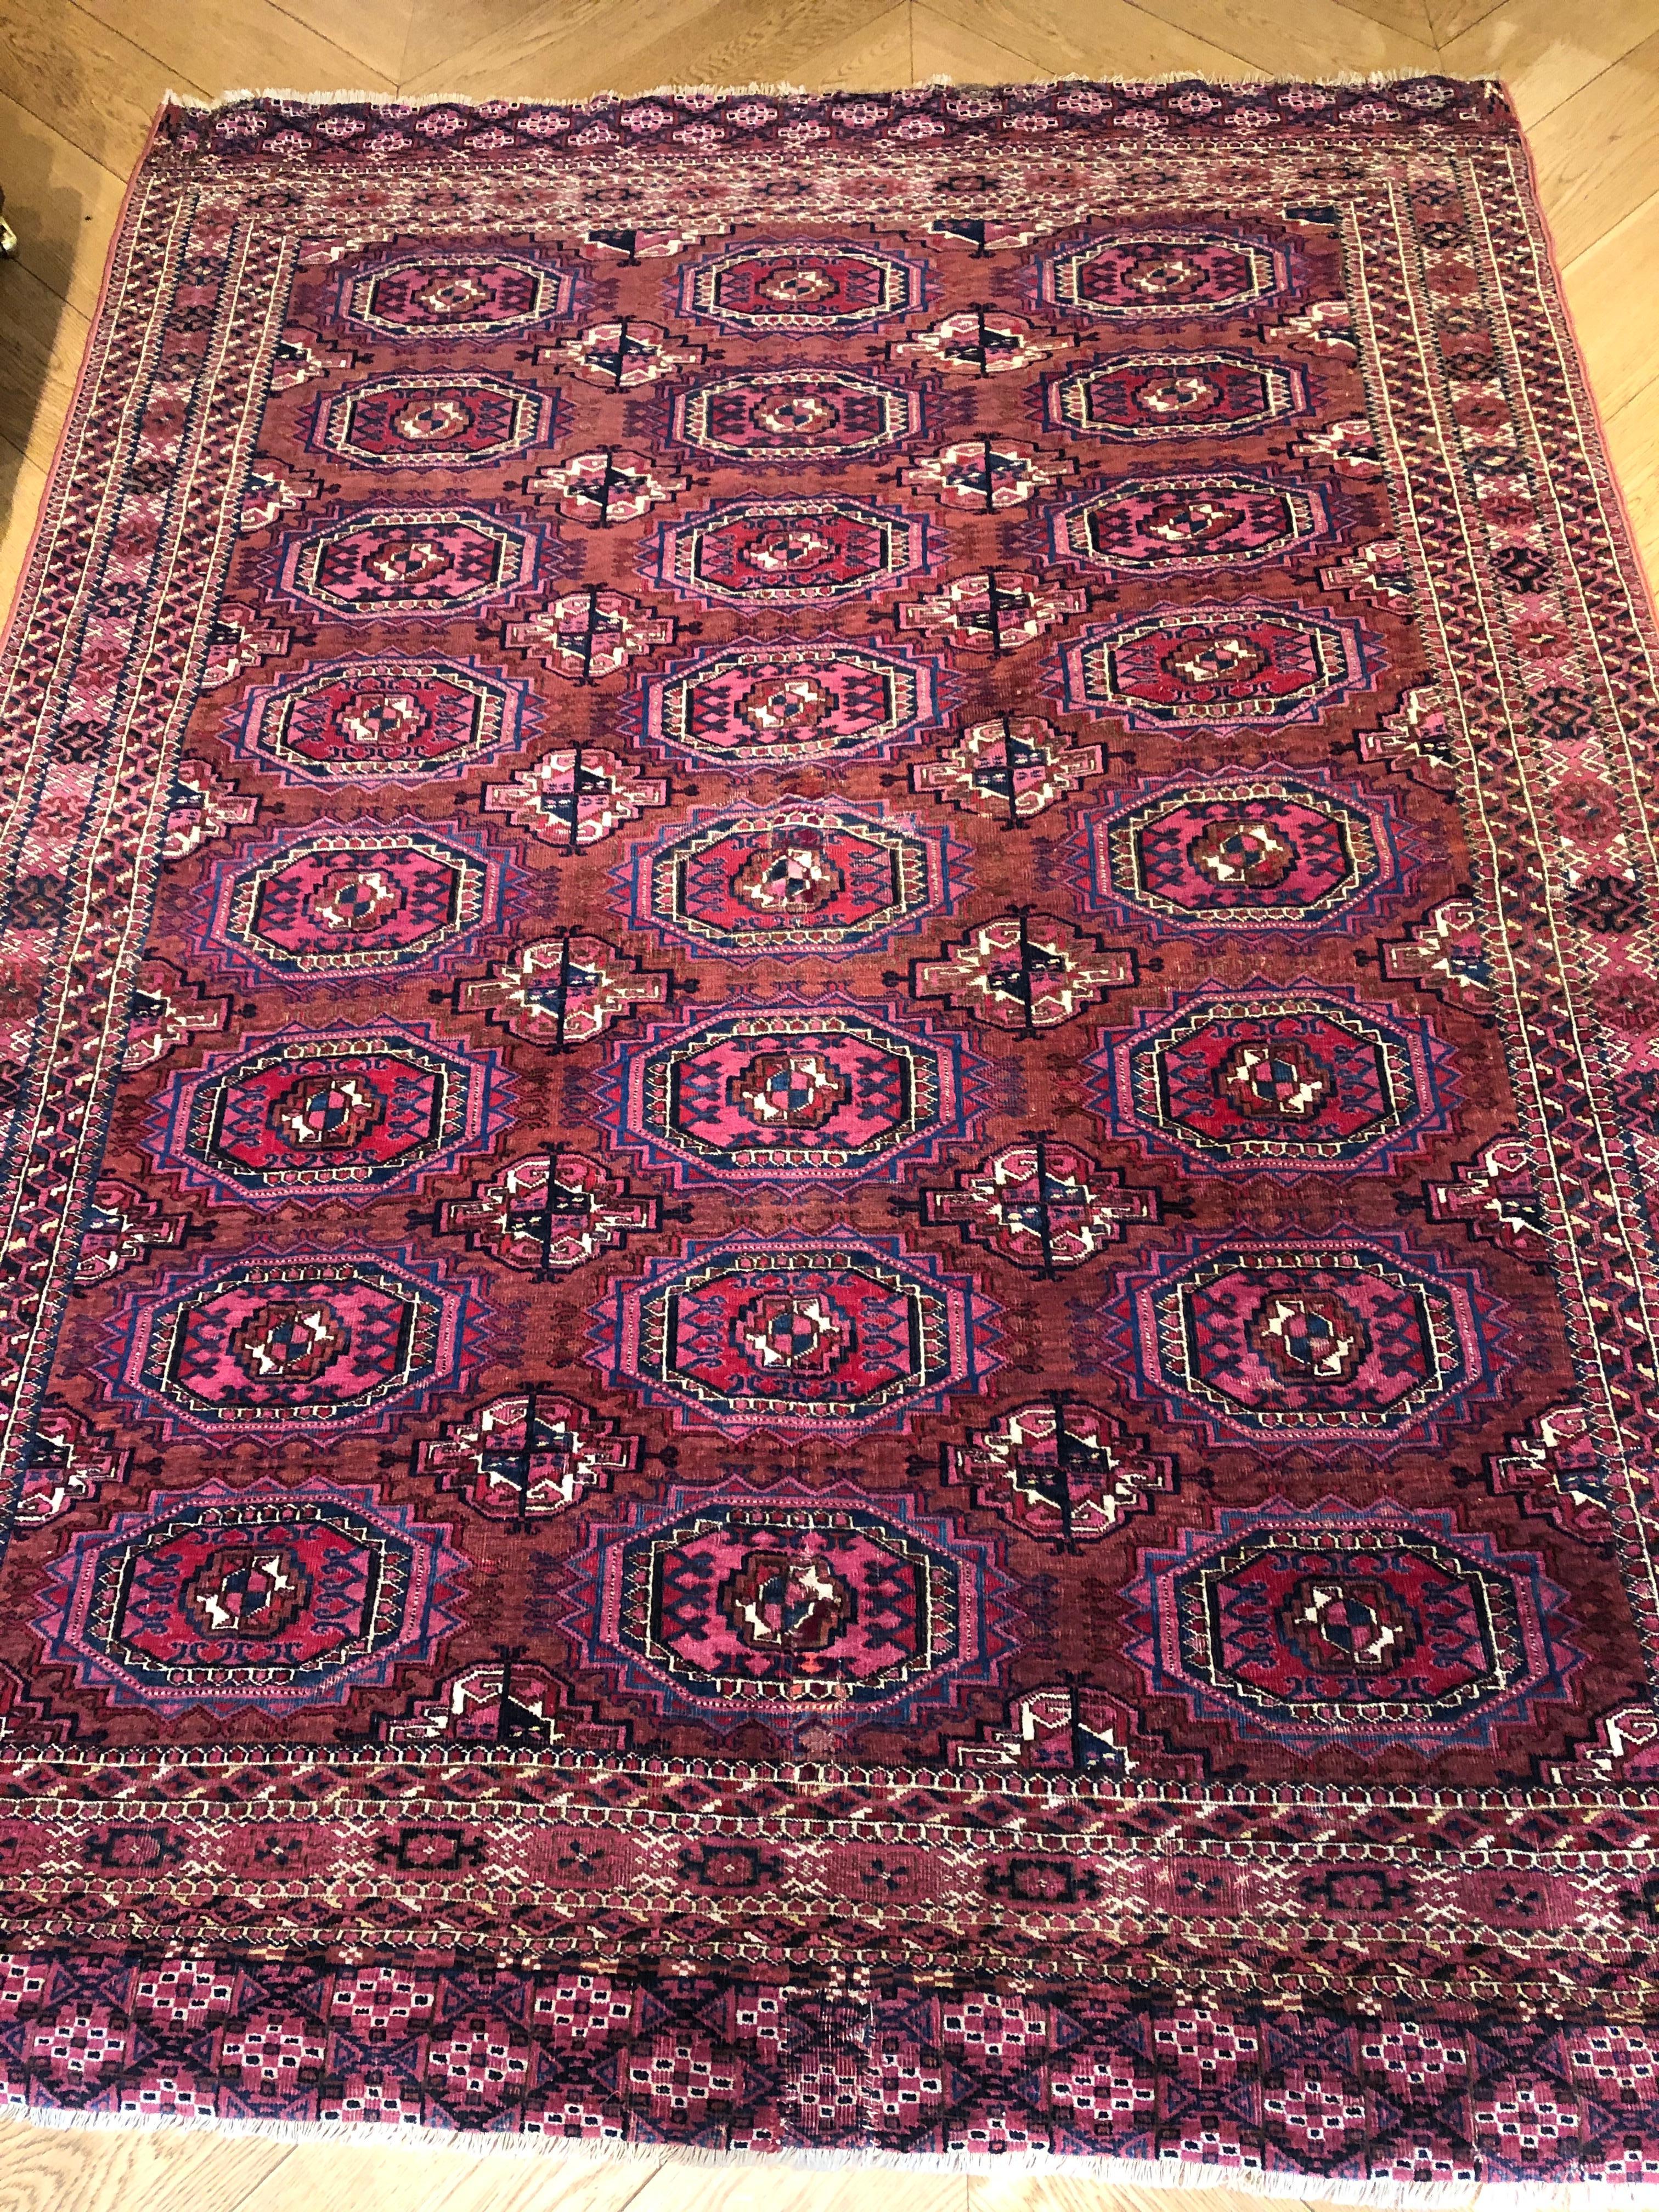 Turceowns are strongly characterized for geometric decoration and overall colour, which goes from red to red-brown. The primary ornamental motif of these carpets is the so-called Gul, an emblem with a geometric structure of a usually octagonal